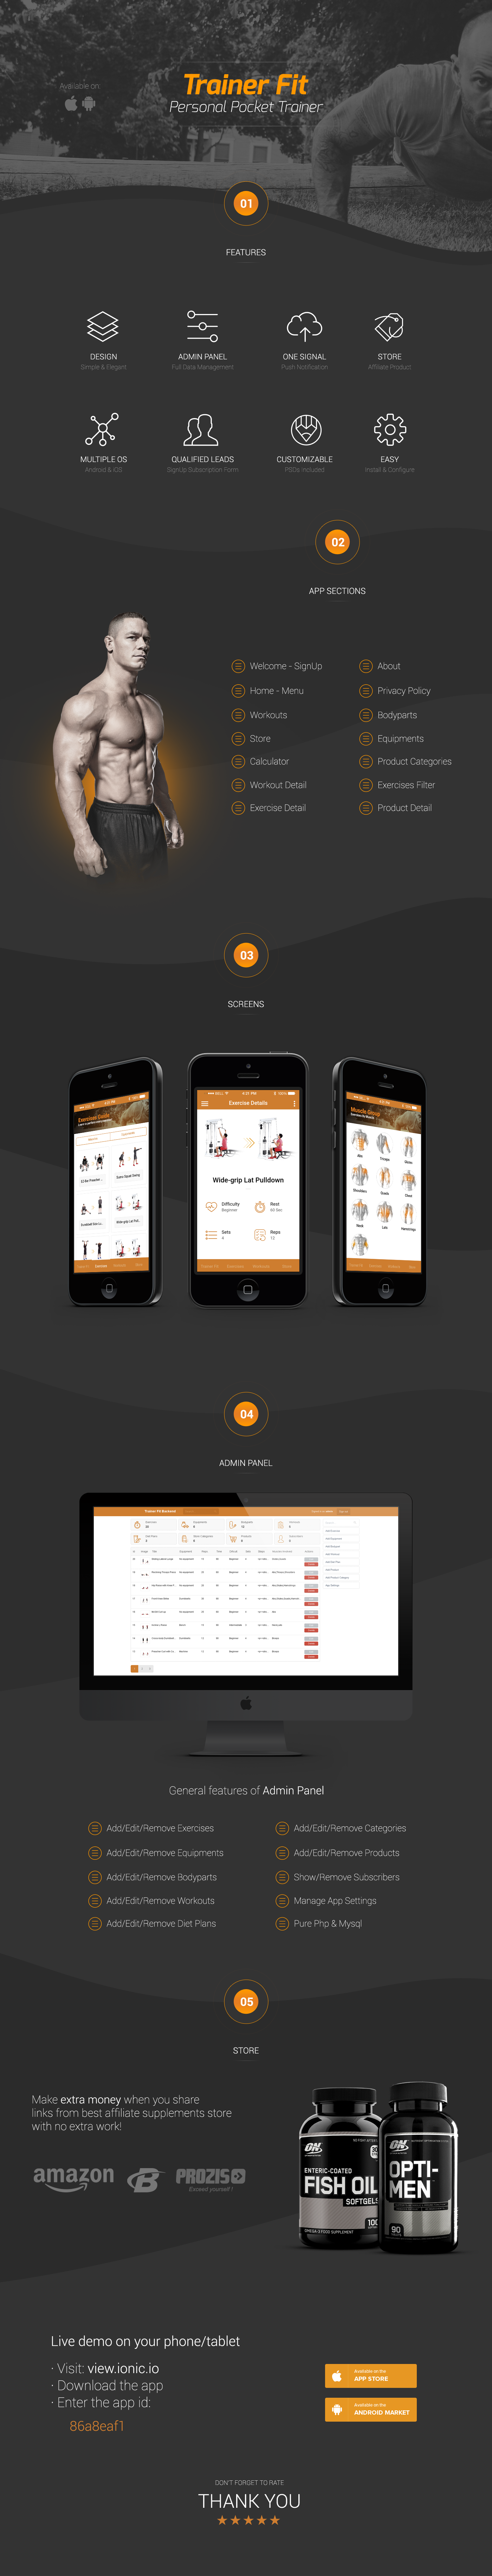 Trainer Fit | Complete Fitness App + Admin Panel | Ionic 1 - 2